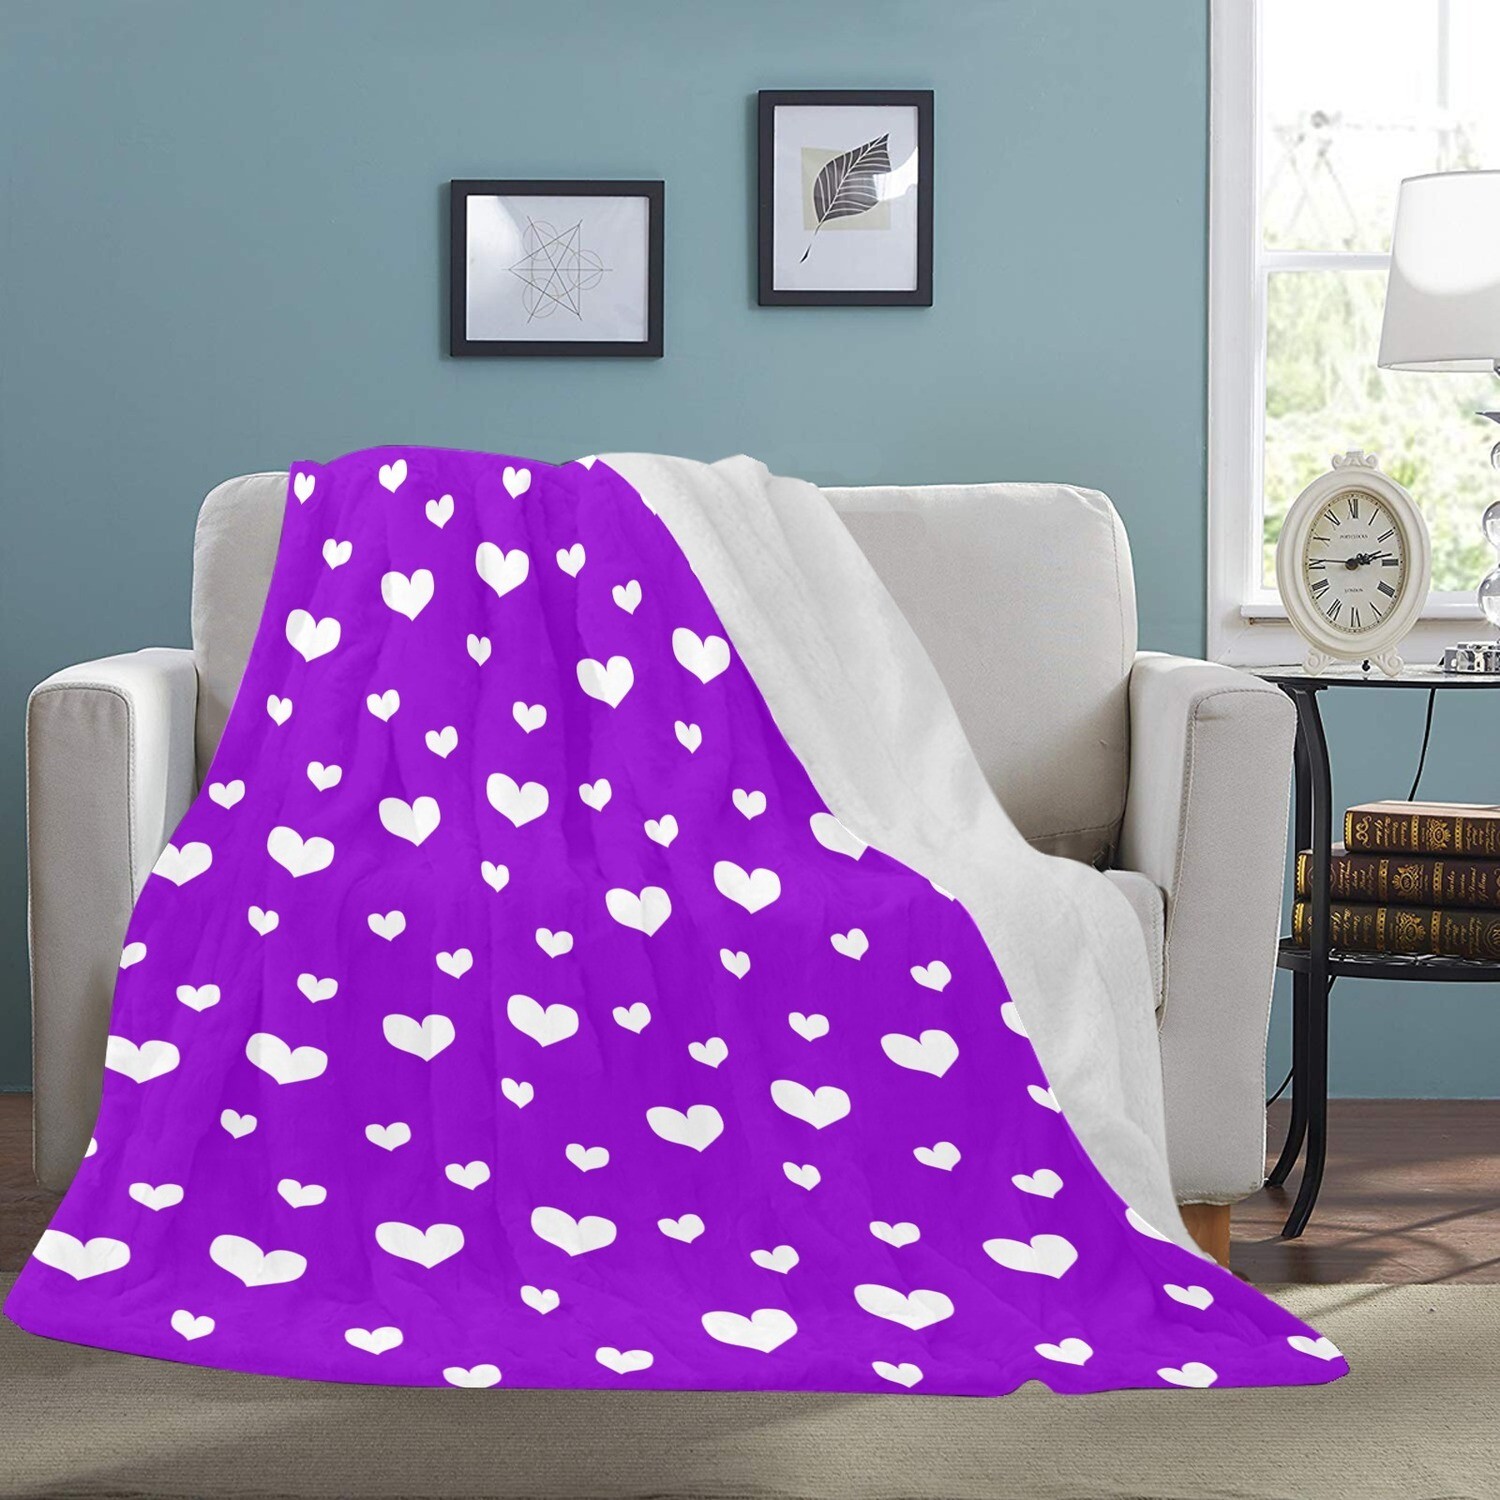 🤴🏽👸🏽💕Large Ultra-Soft Micro Fleece Blanket Valentine white outline hearts on violet purple, gift, gift for her, gift for him, gift for them, 70"x80"